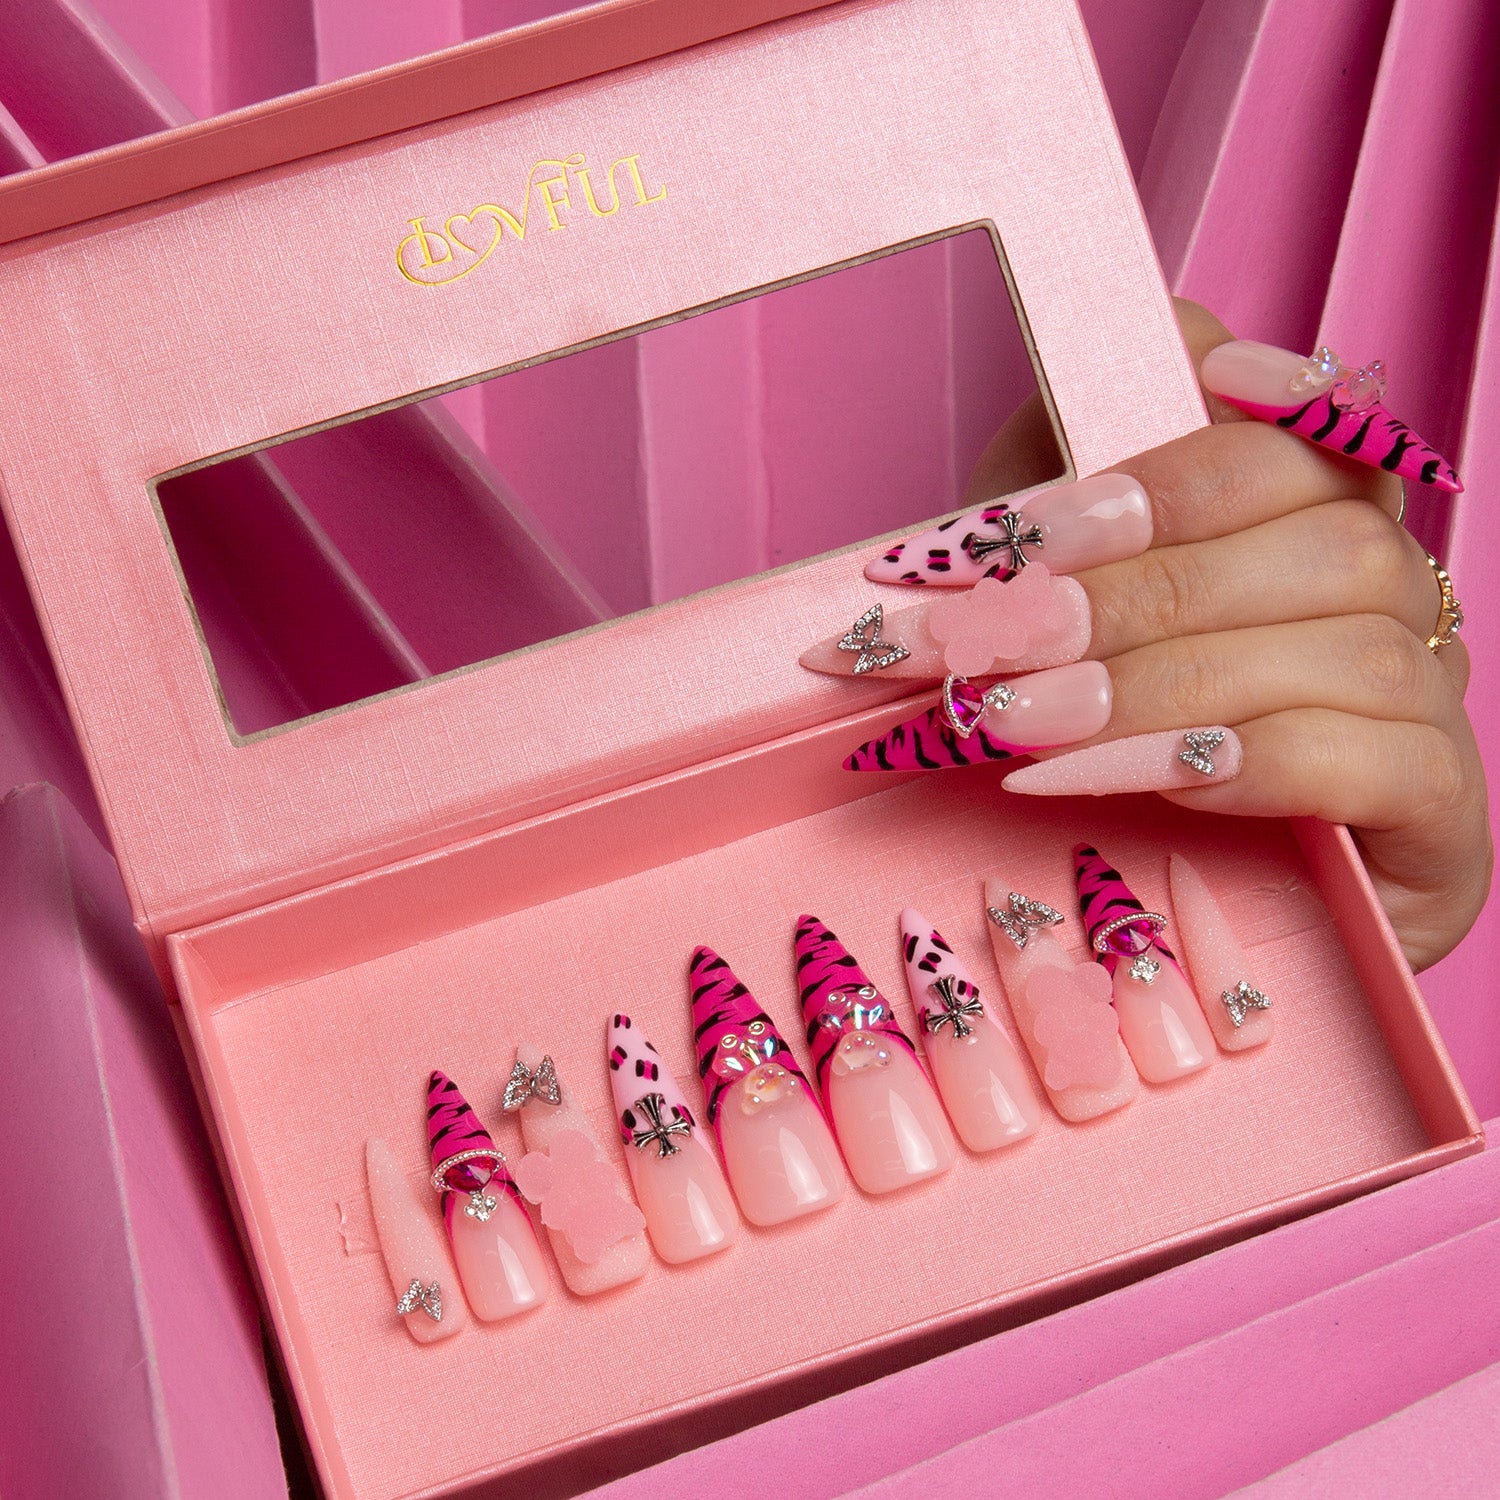 Lovful 'Safari Love' press-on nails with hot pink French tips, leopard prints, butterfly accents, and additional embellishments, displayed in a pink box with a clear window.